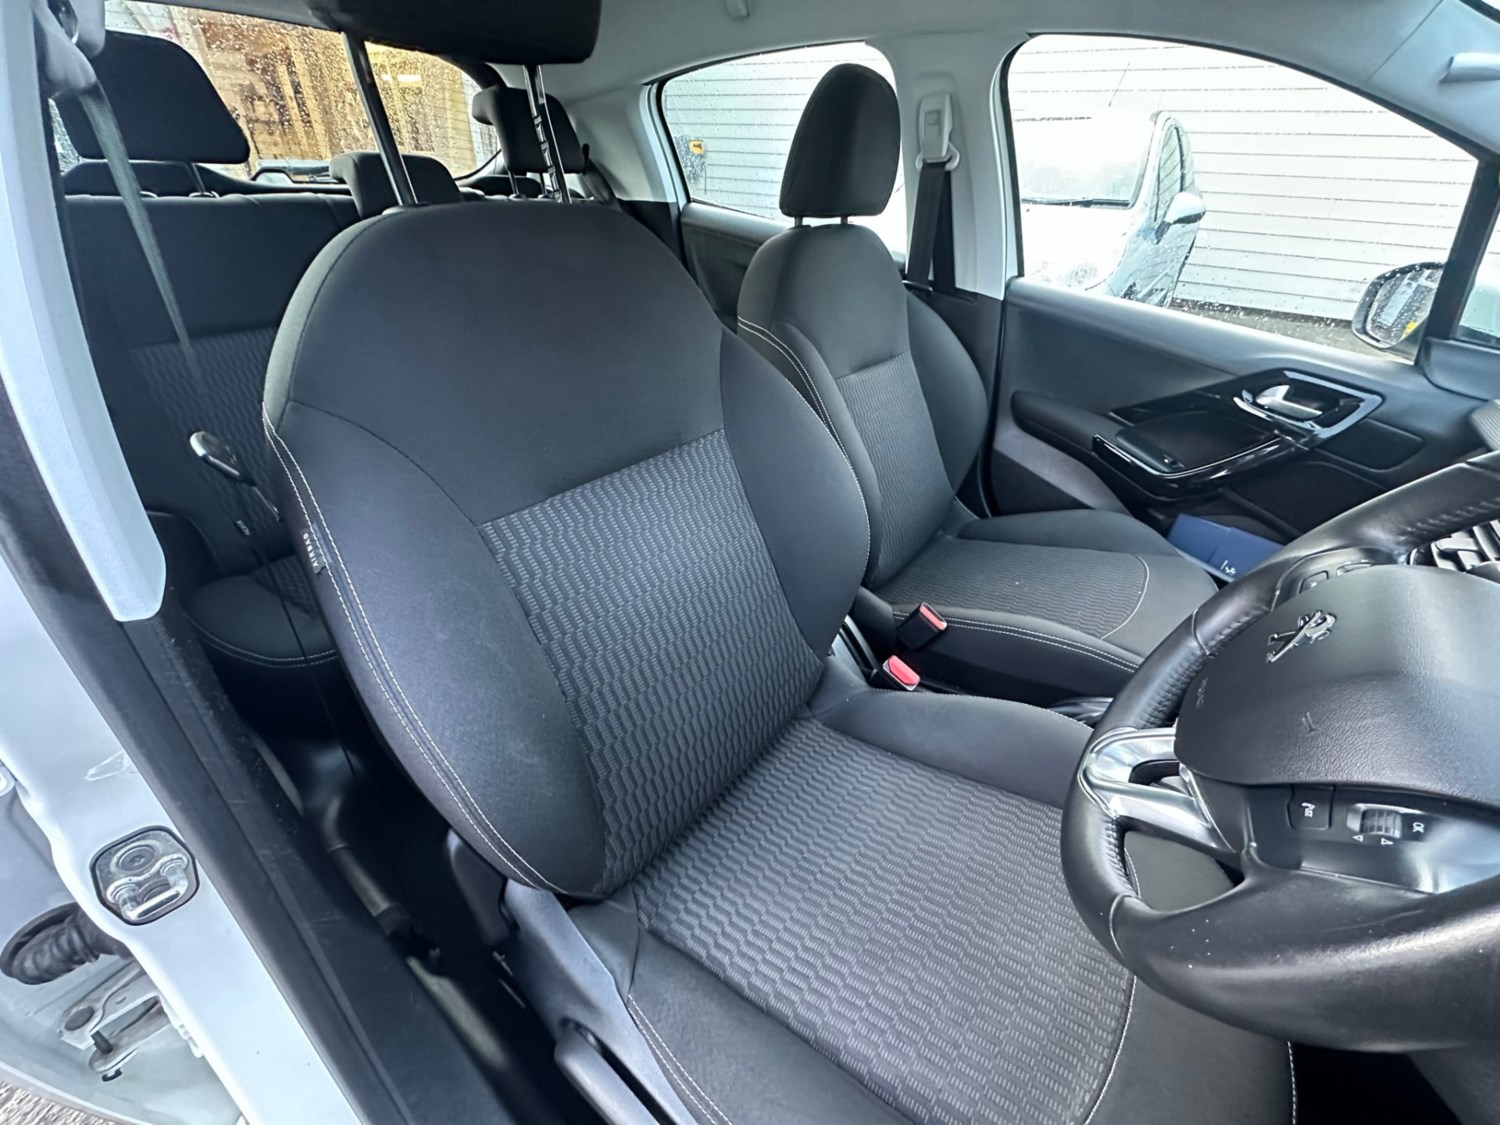 2019 (19) Peugeot 208 1.5 BlueHDi Active 5dr [5 Speed] For Sale In Launceston, Cornwall